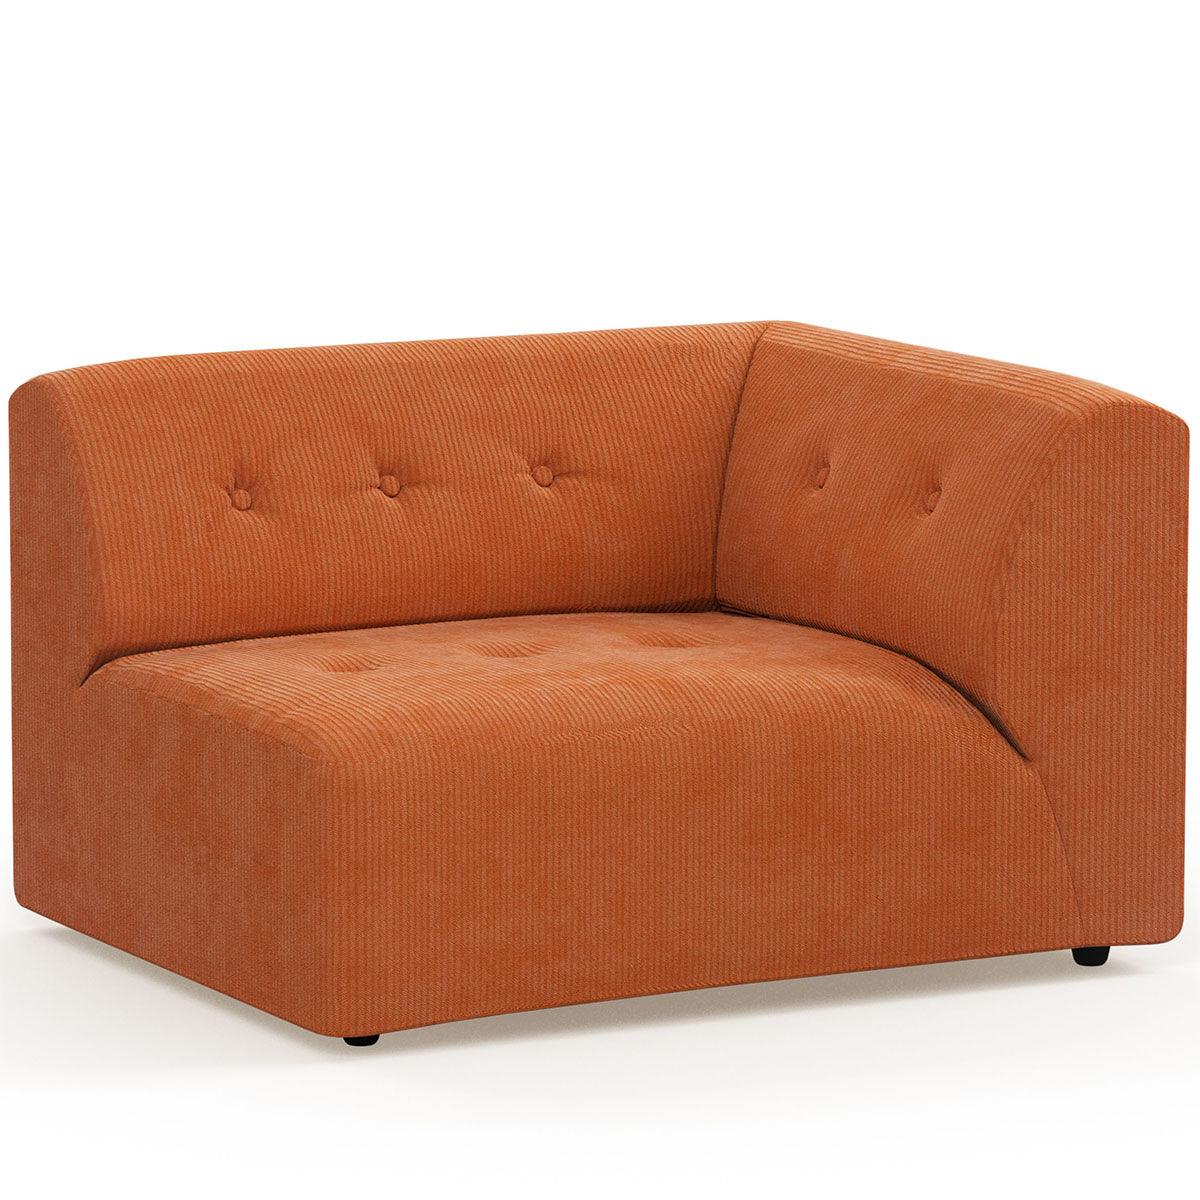 Vint Corduroy Rib Couch - Element Right 1.5-Seat - WOO .Design